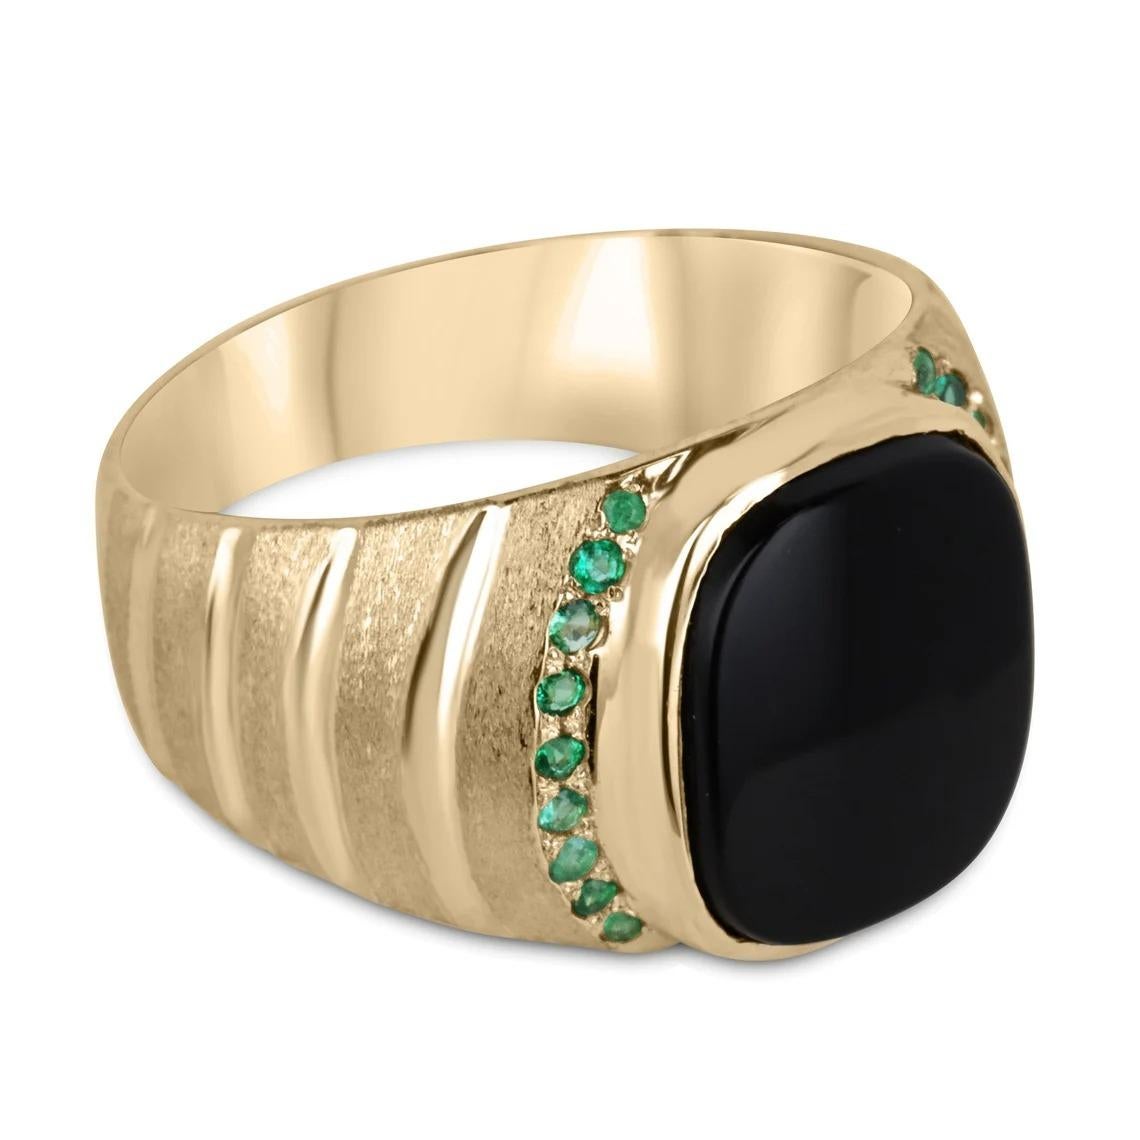 Setting Style: Bezel/Pave
Setting Material: 14K Yellow Gold
Setting Weight: 6.7 Grams

Main Stone: Black Onyx
Shape: Cushion
Weight: Approx 5-Carats
Color: Black
Treatments: Natural

Secondary Stone:
Weight: 0.32-Carats (Total)
Cut: Round
Clarity: